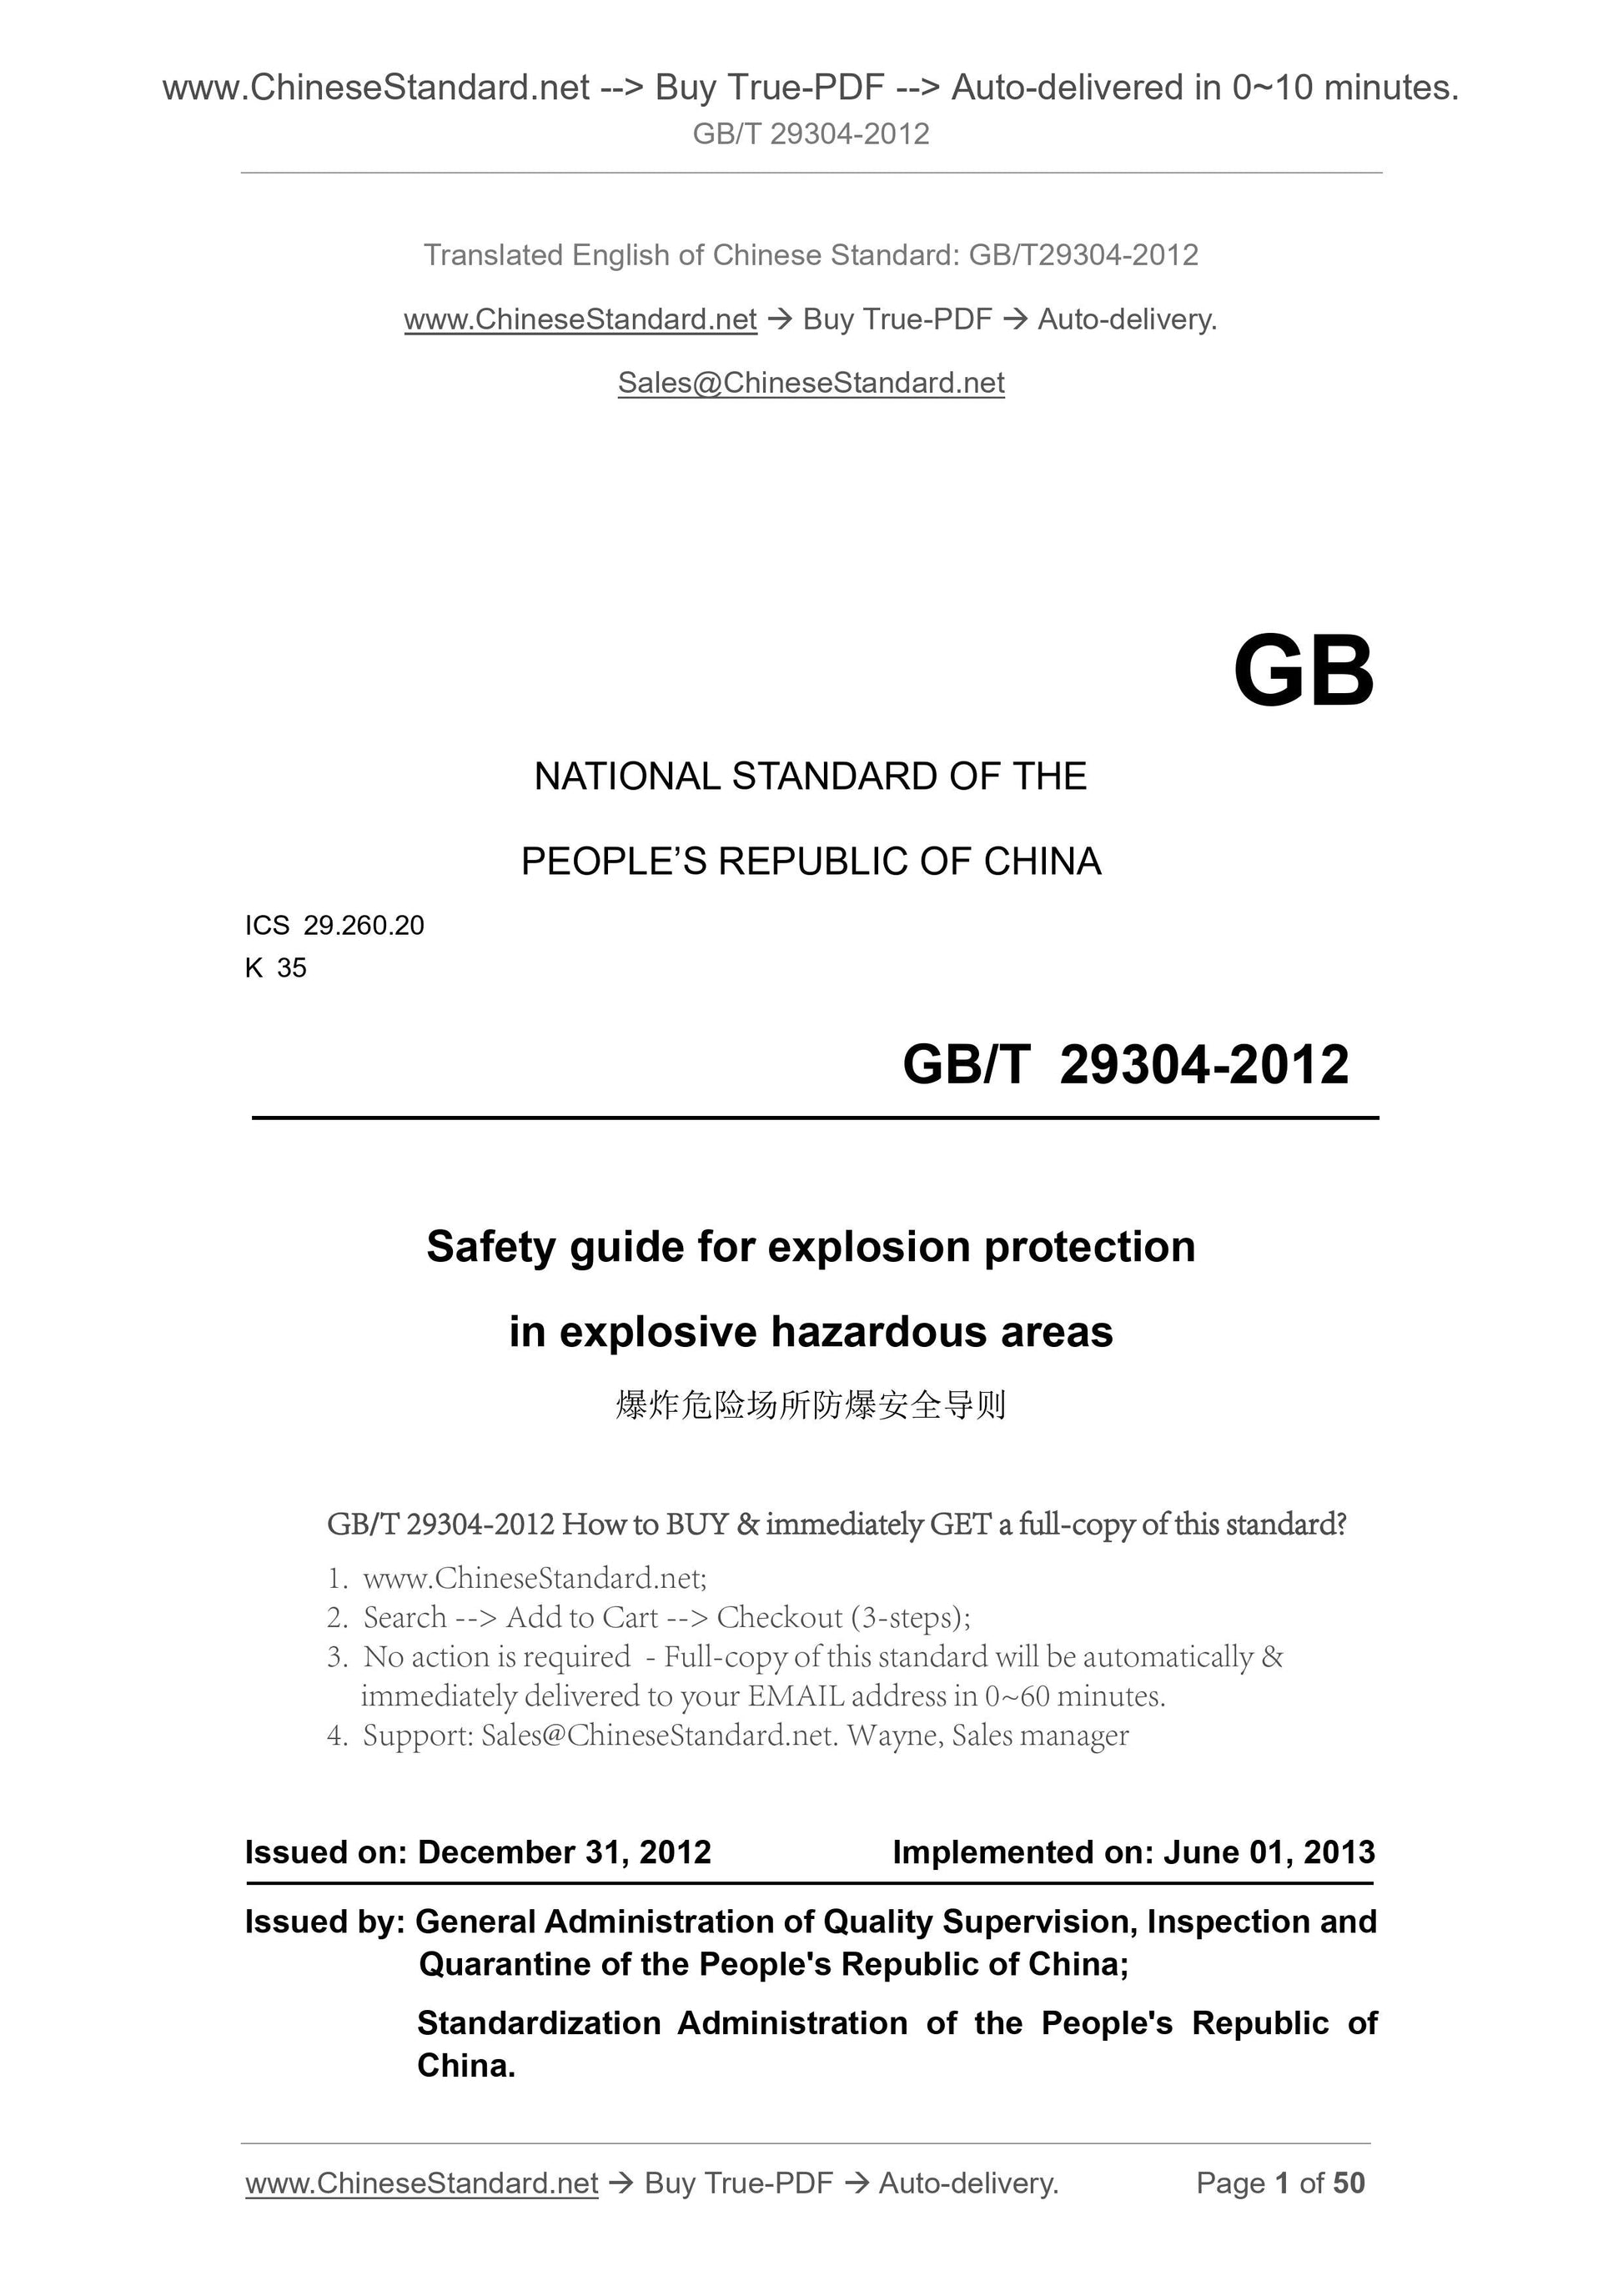 GB/T 29304-2012 Page 1